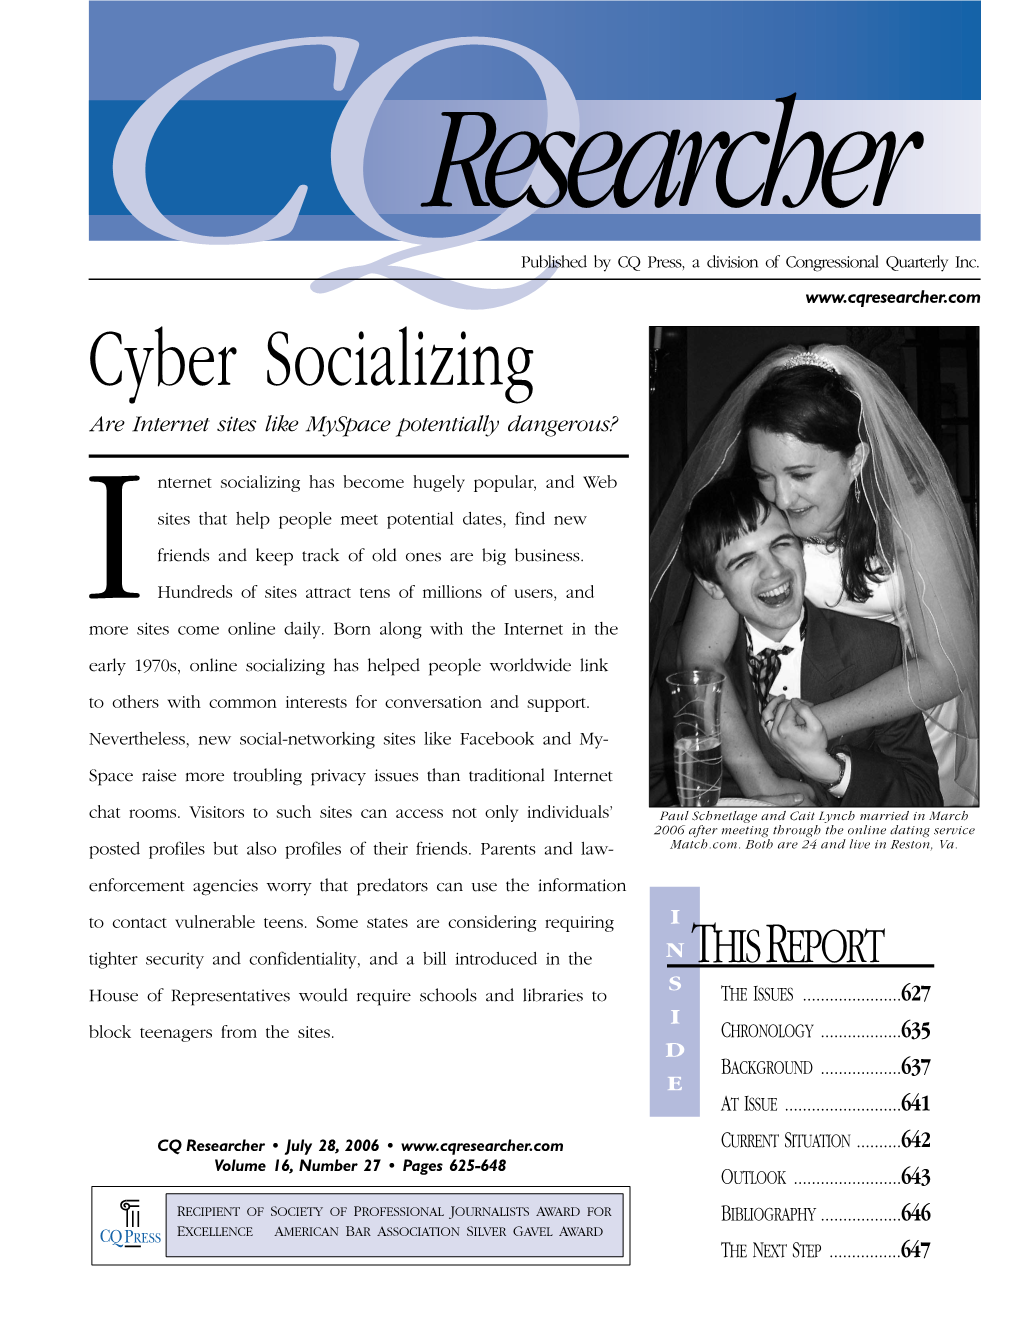 Cyber Socializing Are Internet Sites Like Myspace Potentially Dangerous?